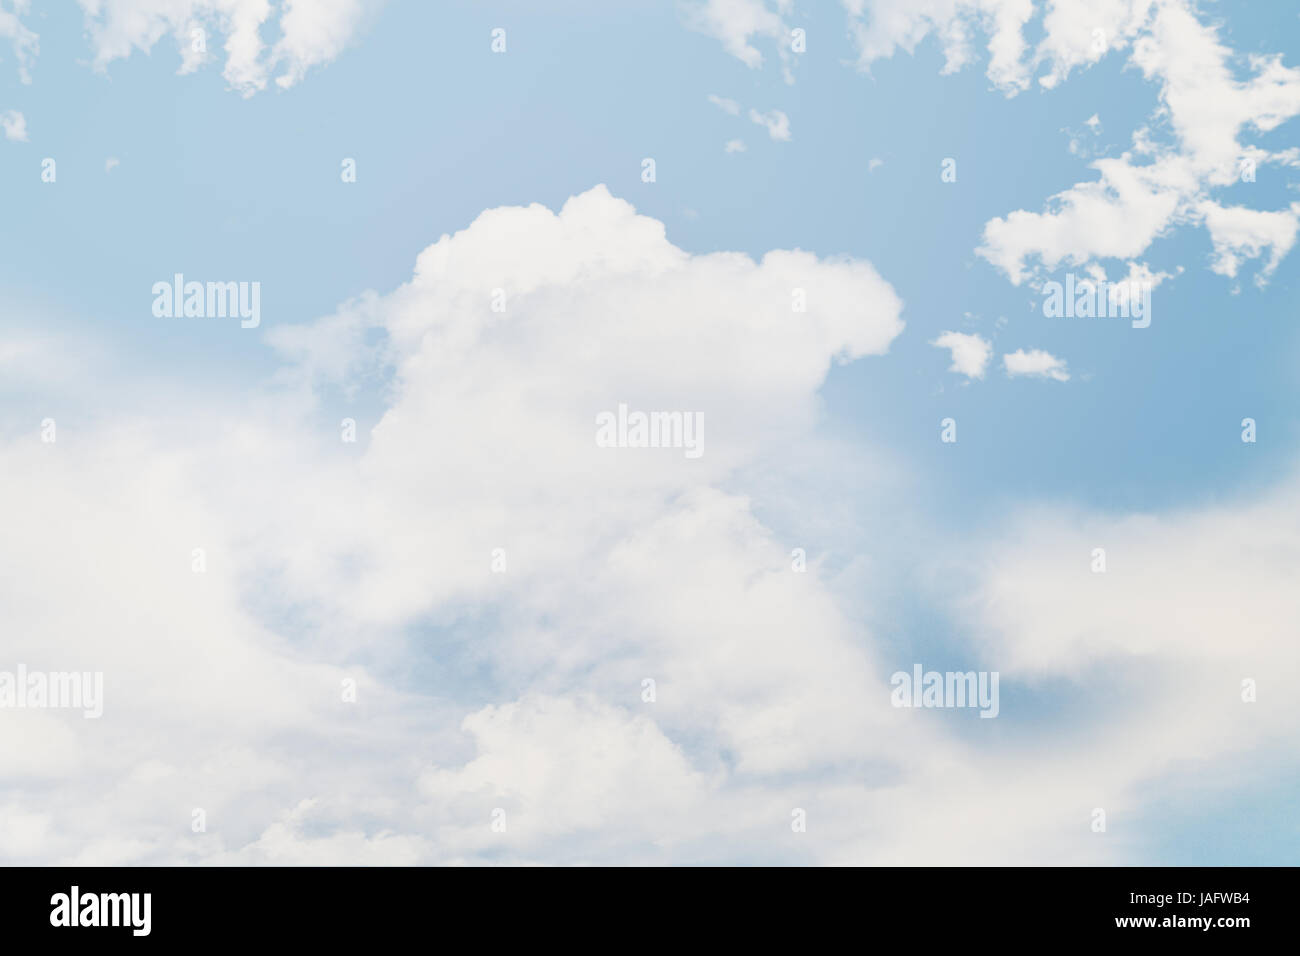 Beautiful abstract summer sky with clouds. Stock Photo